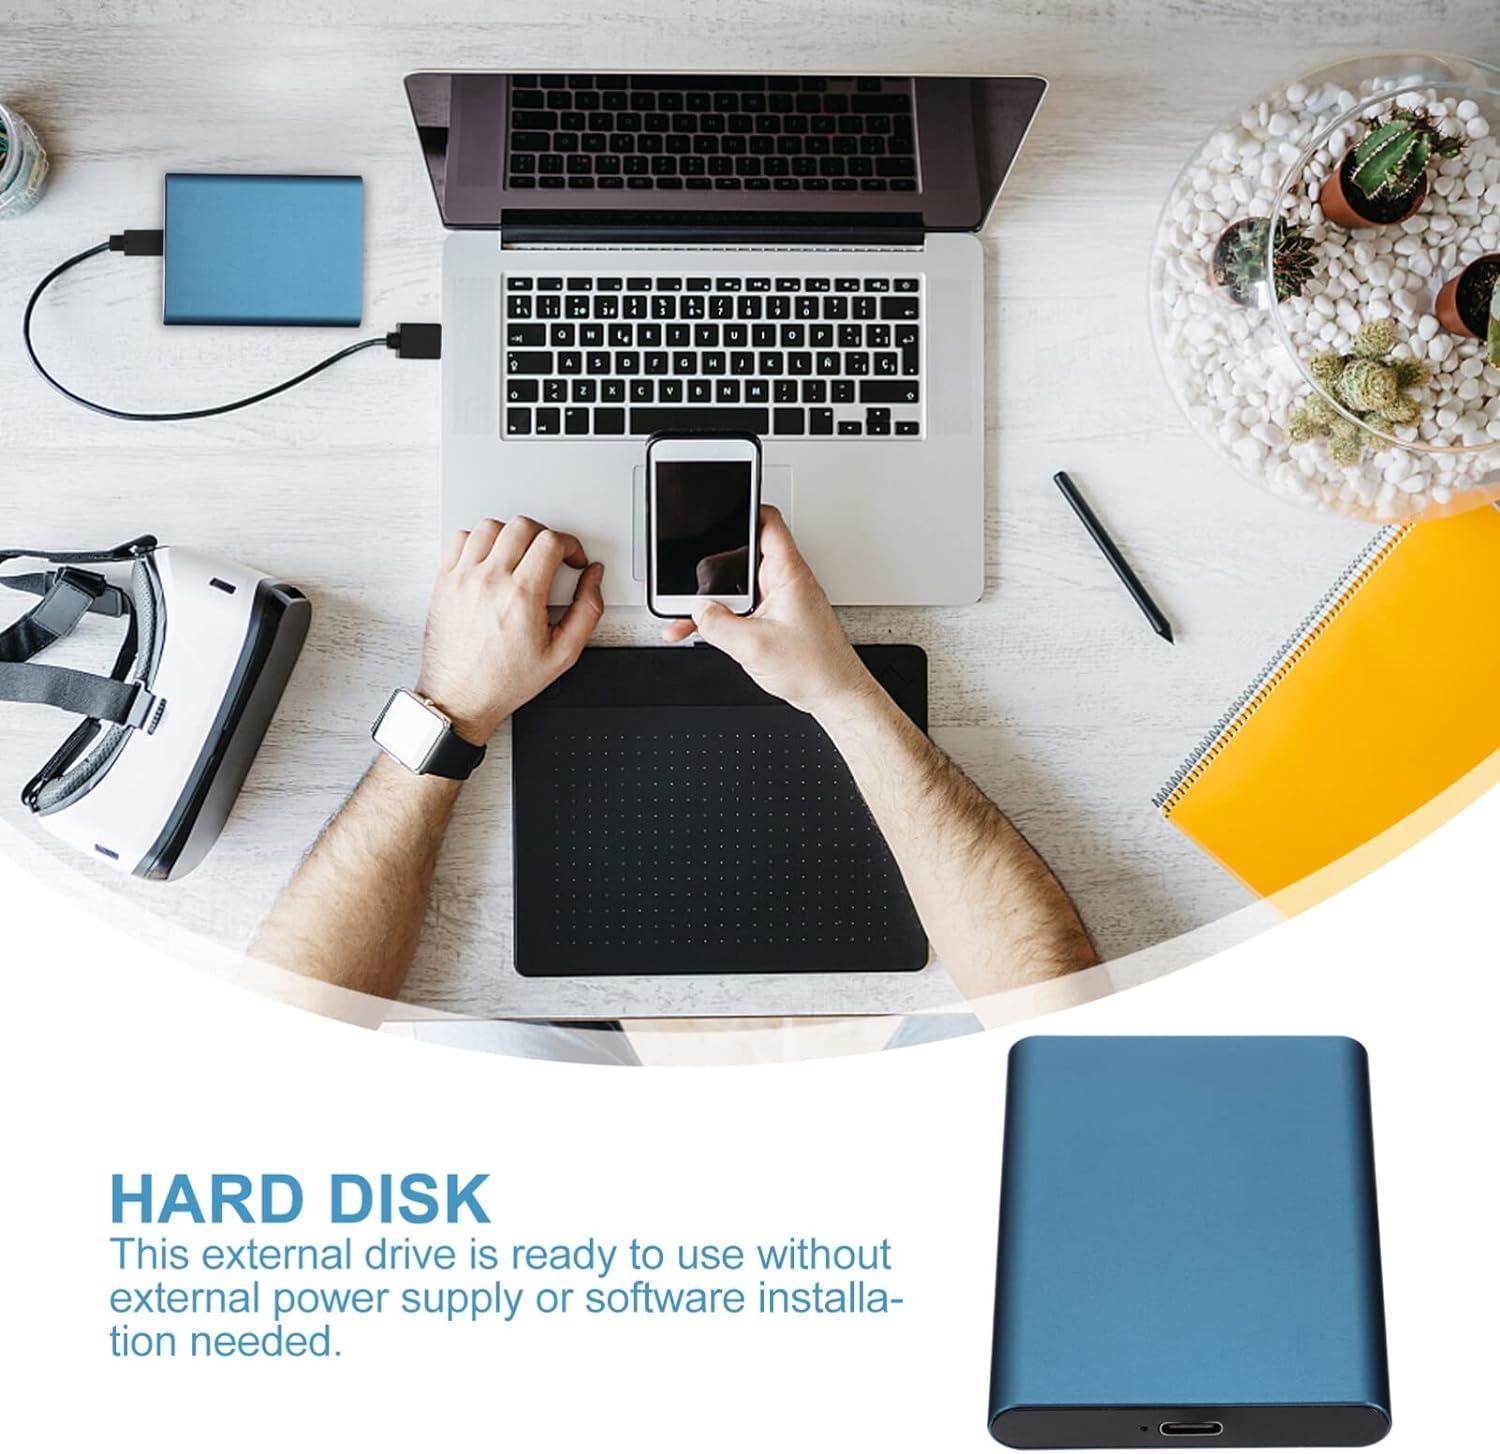 UKCOCO 1pc SSD Solid State Drive External Hard Disk 64GB Hard